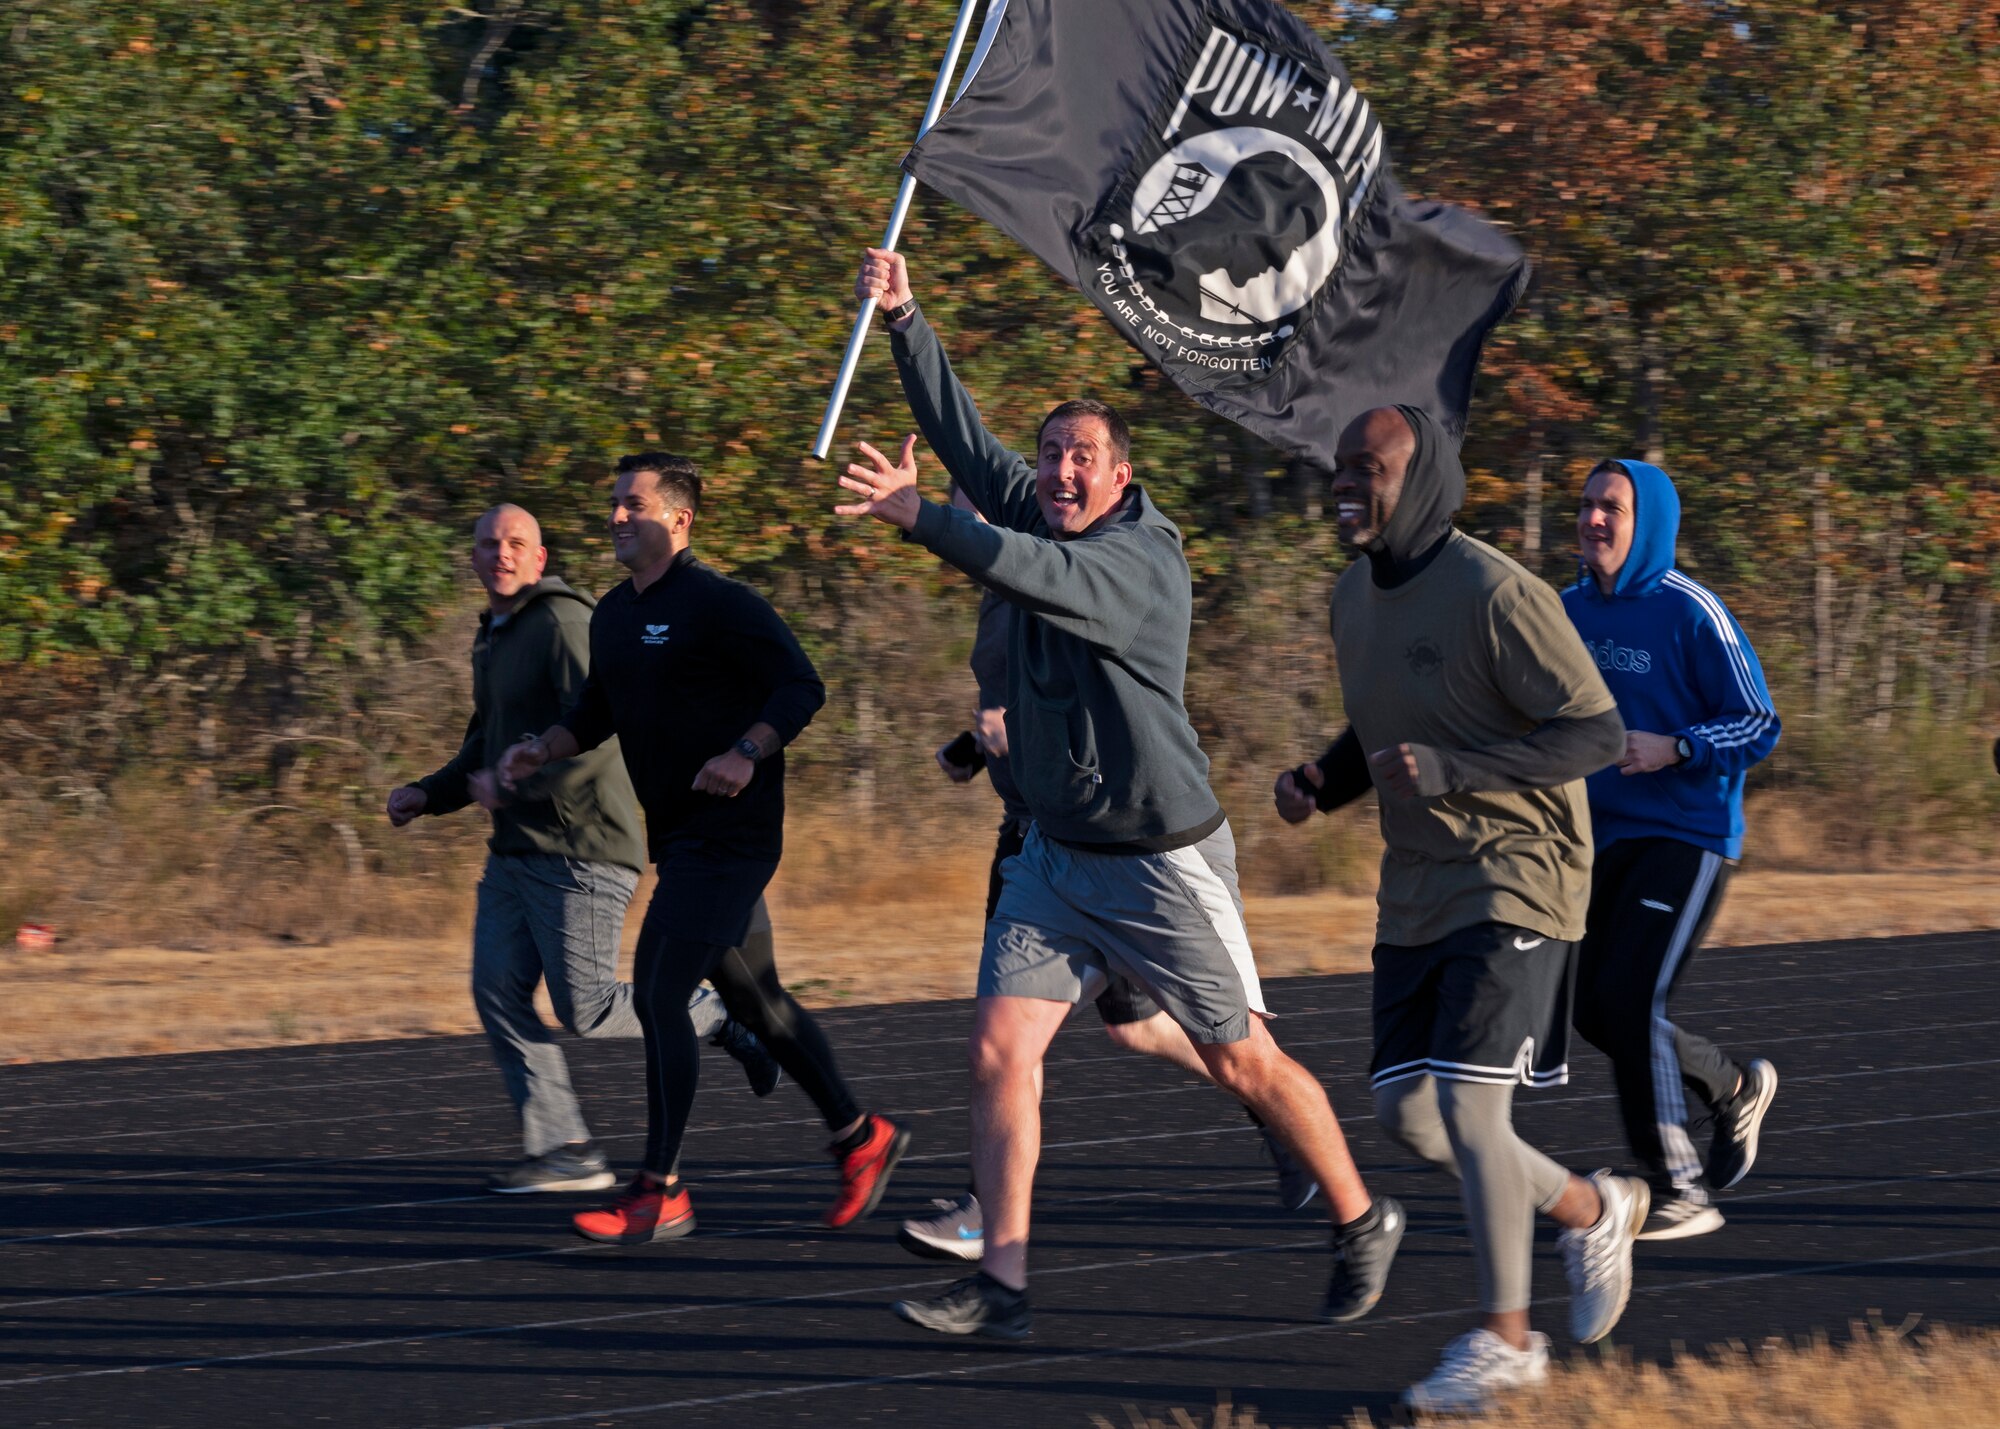 U.S. Air Force Maj. Zachary Magnin, 62nd Aircraft Maintenance Squadron commander, bears the POW/MIA flag as he and other 62nd AMXS leadership participate in the 24-hour POW/MIA Remembrance Run at Joint Base Lewis-McChord, Washington, Sept. 16, 2021. The official U.S. POW/MIA flag was created through the efforts of family members of POW/MIA Americans to display a suitable symbol that made the public aware of their loved ones who were being held prisoner or declared missing during the Vietnam War. (U.S. Air Force photo by Senior Airman Zoe Thacker)